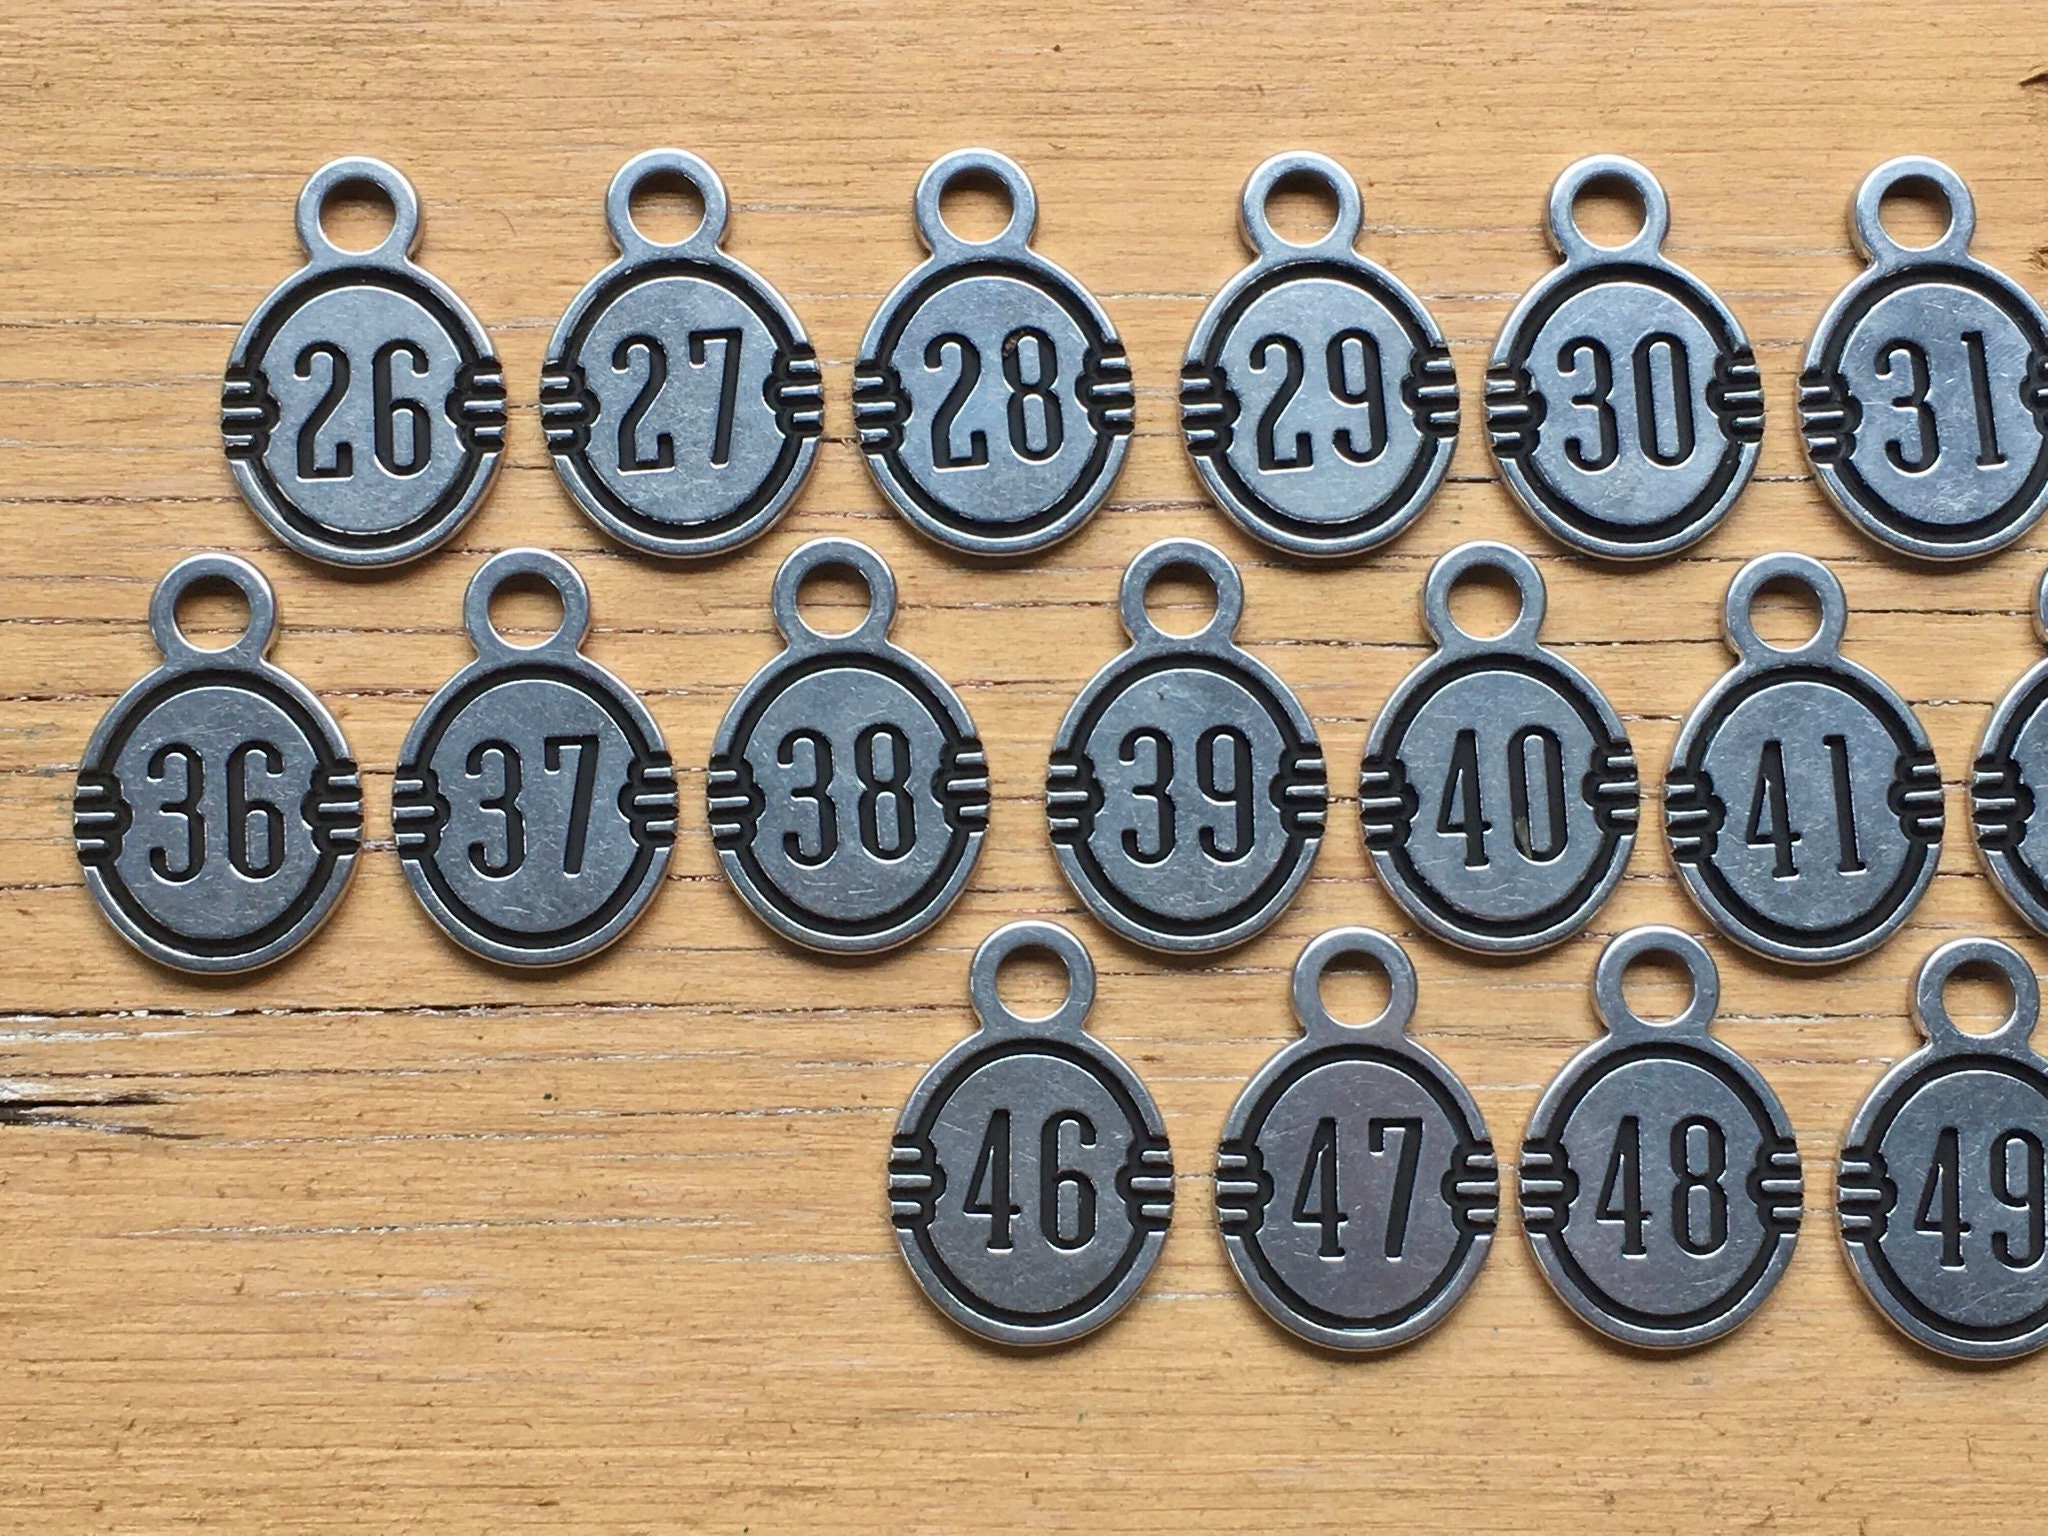 METAL NUMBER TAGS 26-50 NEW IN BAG 6A234A 